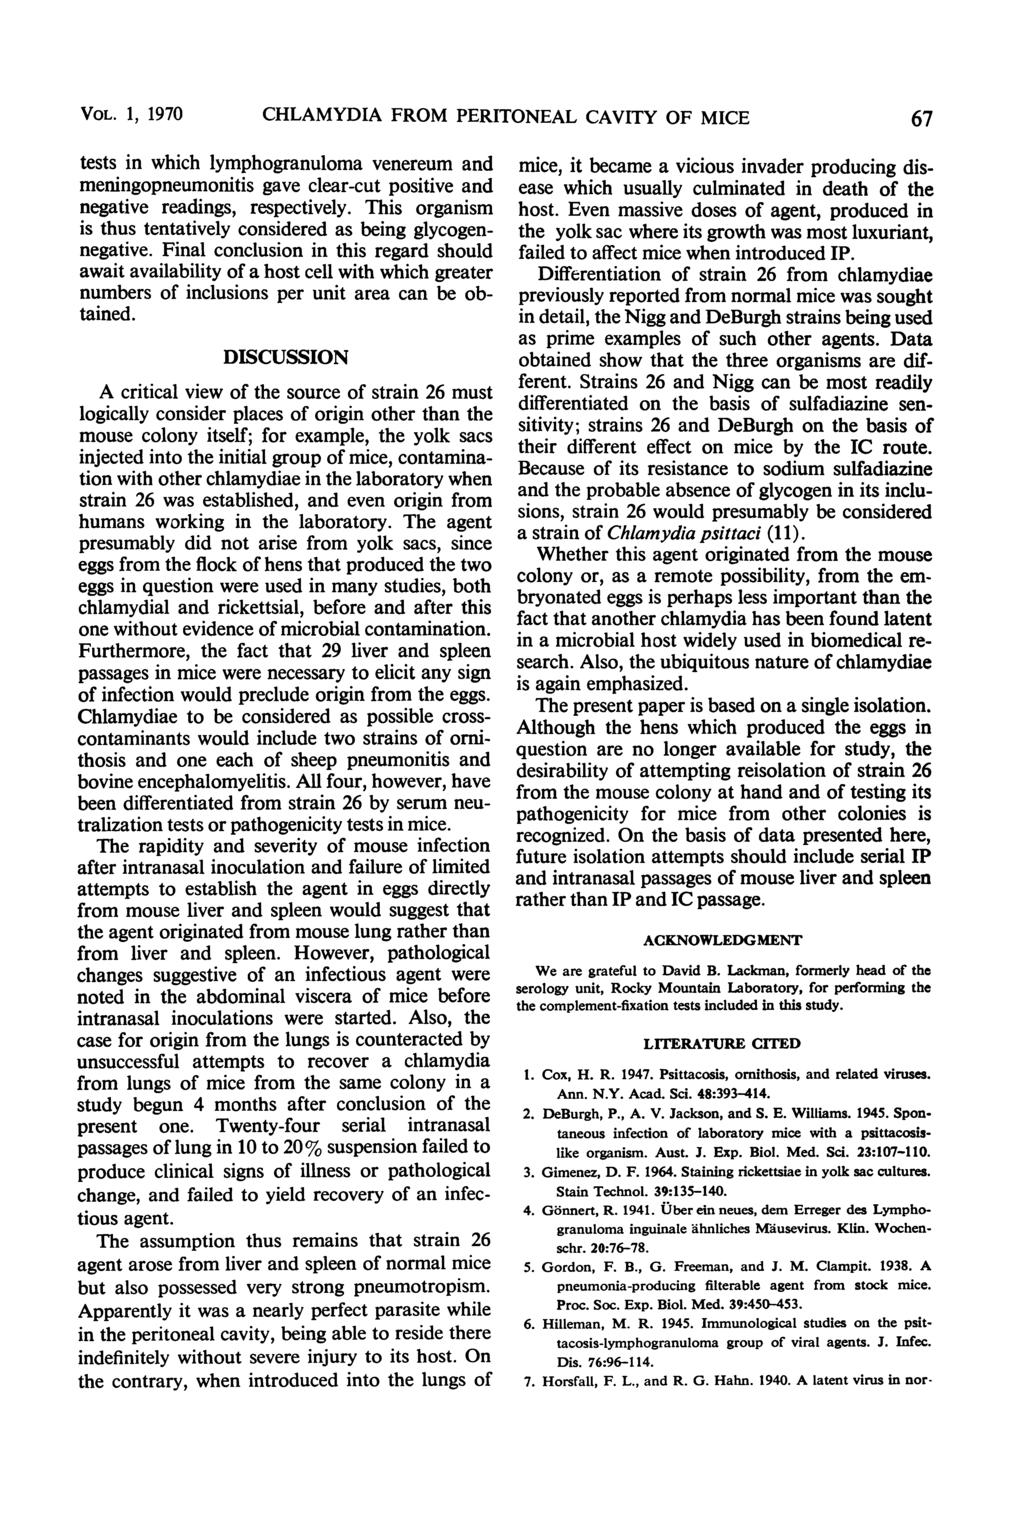 VOL. 1 X 1970 CHLAMYDIA FROM PERITONEAL CAVITY OF MICE 67 tests in which lymphogranuloma venereum and meningopneumonitis gave clear-cut positive and negative readings, respectively.